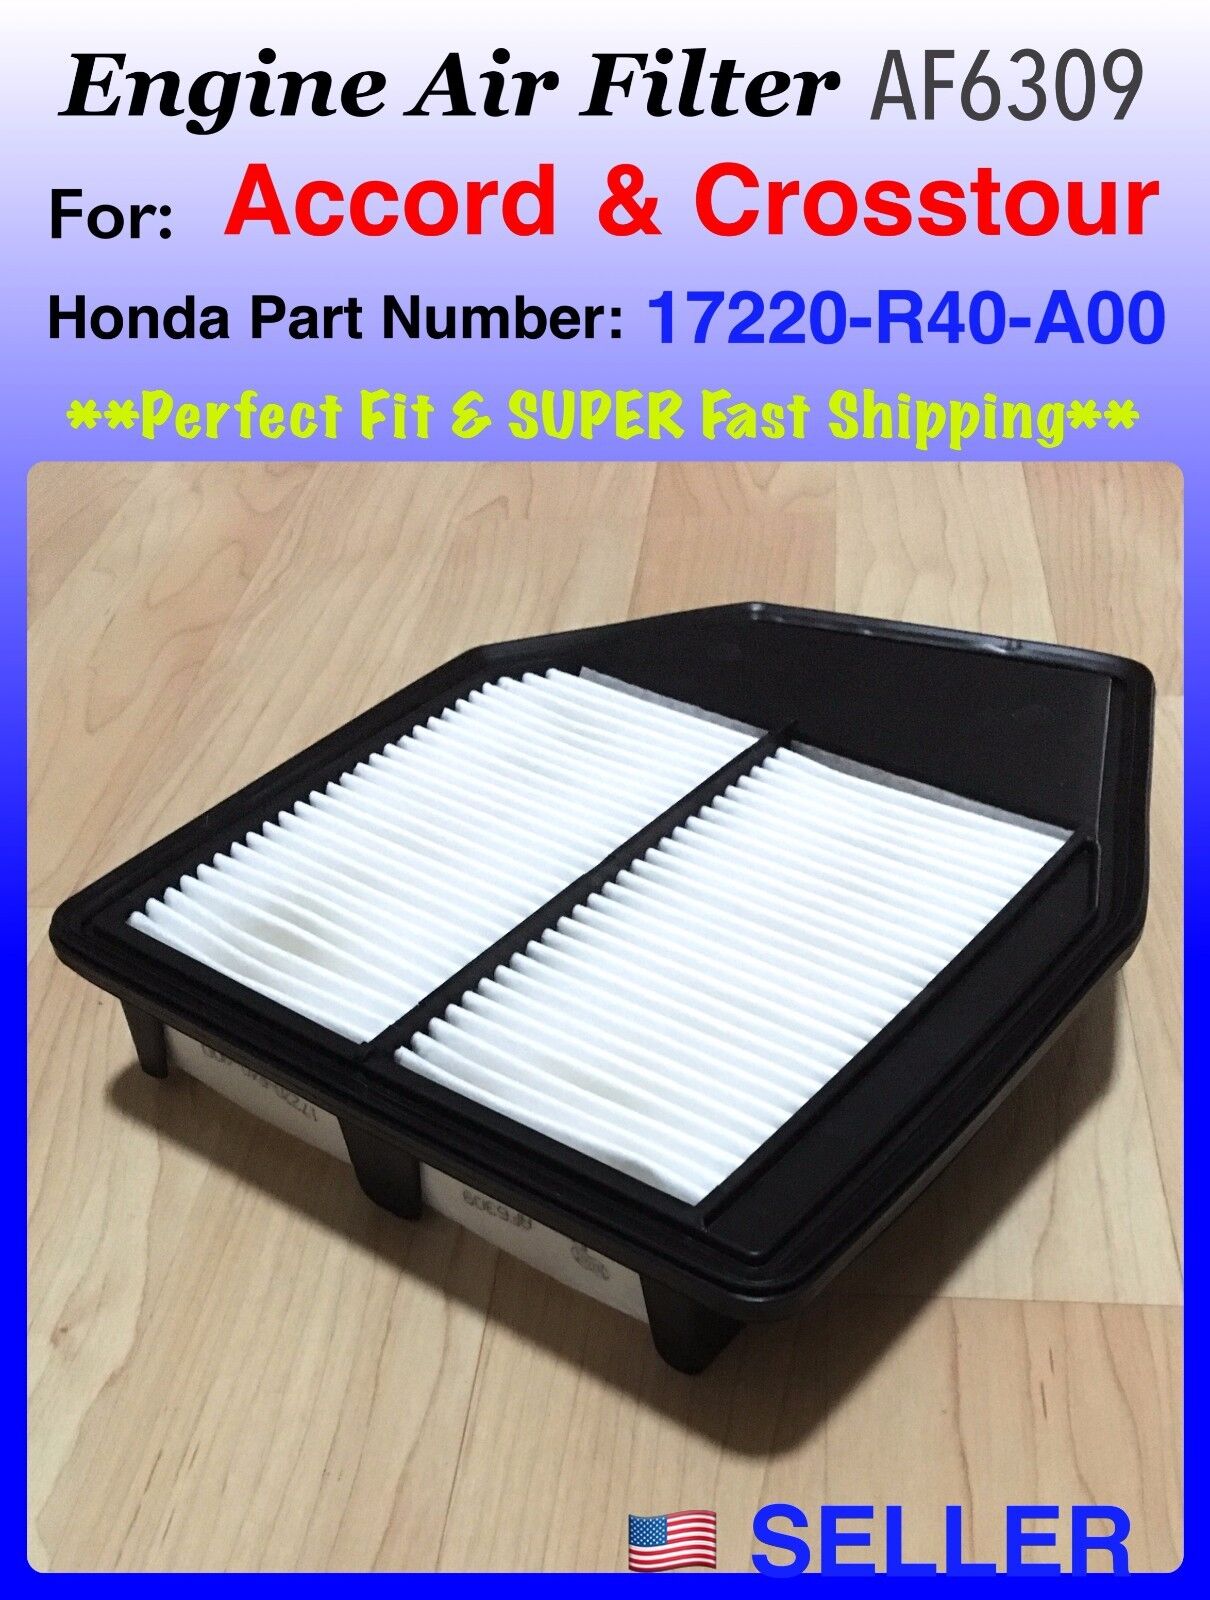 ENGINE AIR FILTER For Honda Accord  4CYL 2.4L 2008-2012 AF6309 Fast ship